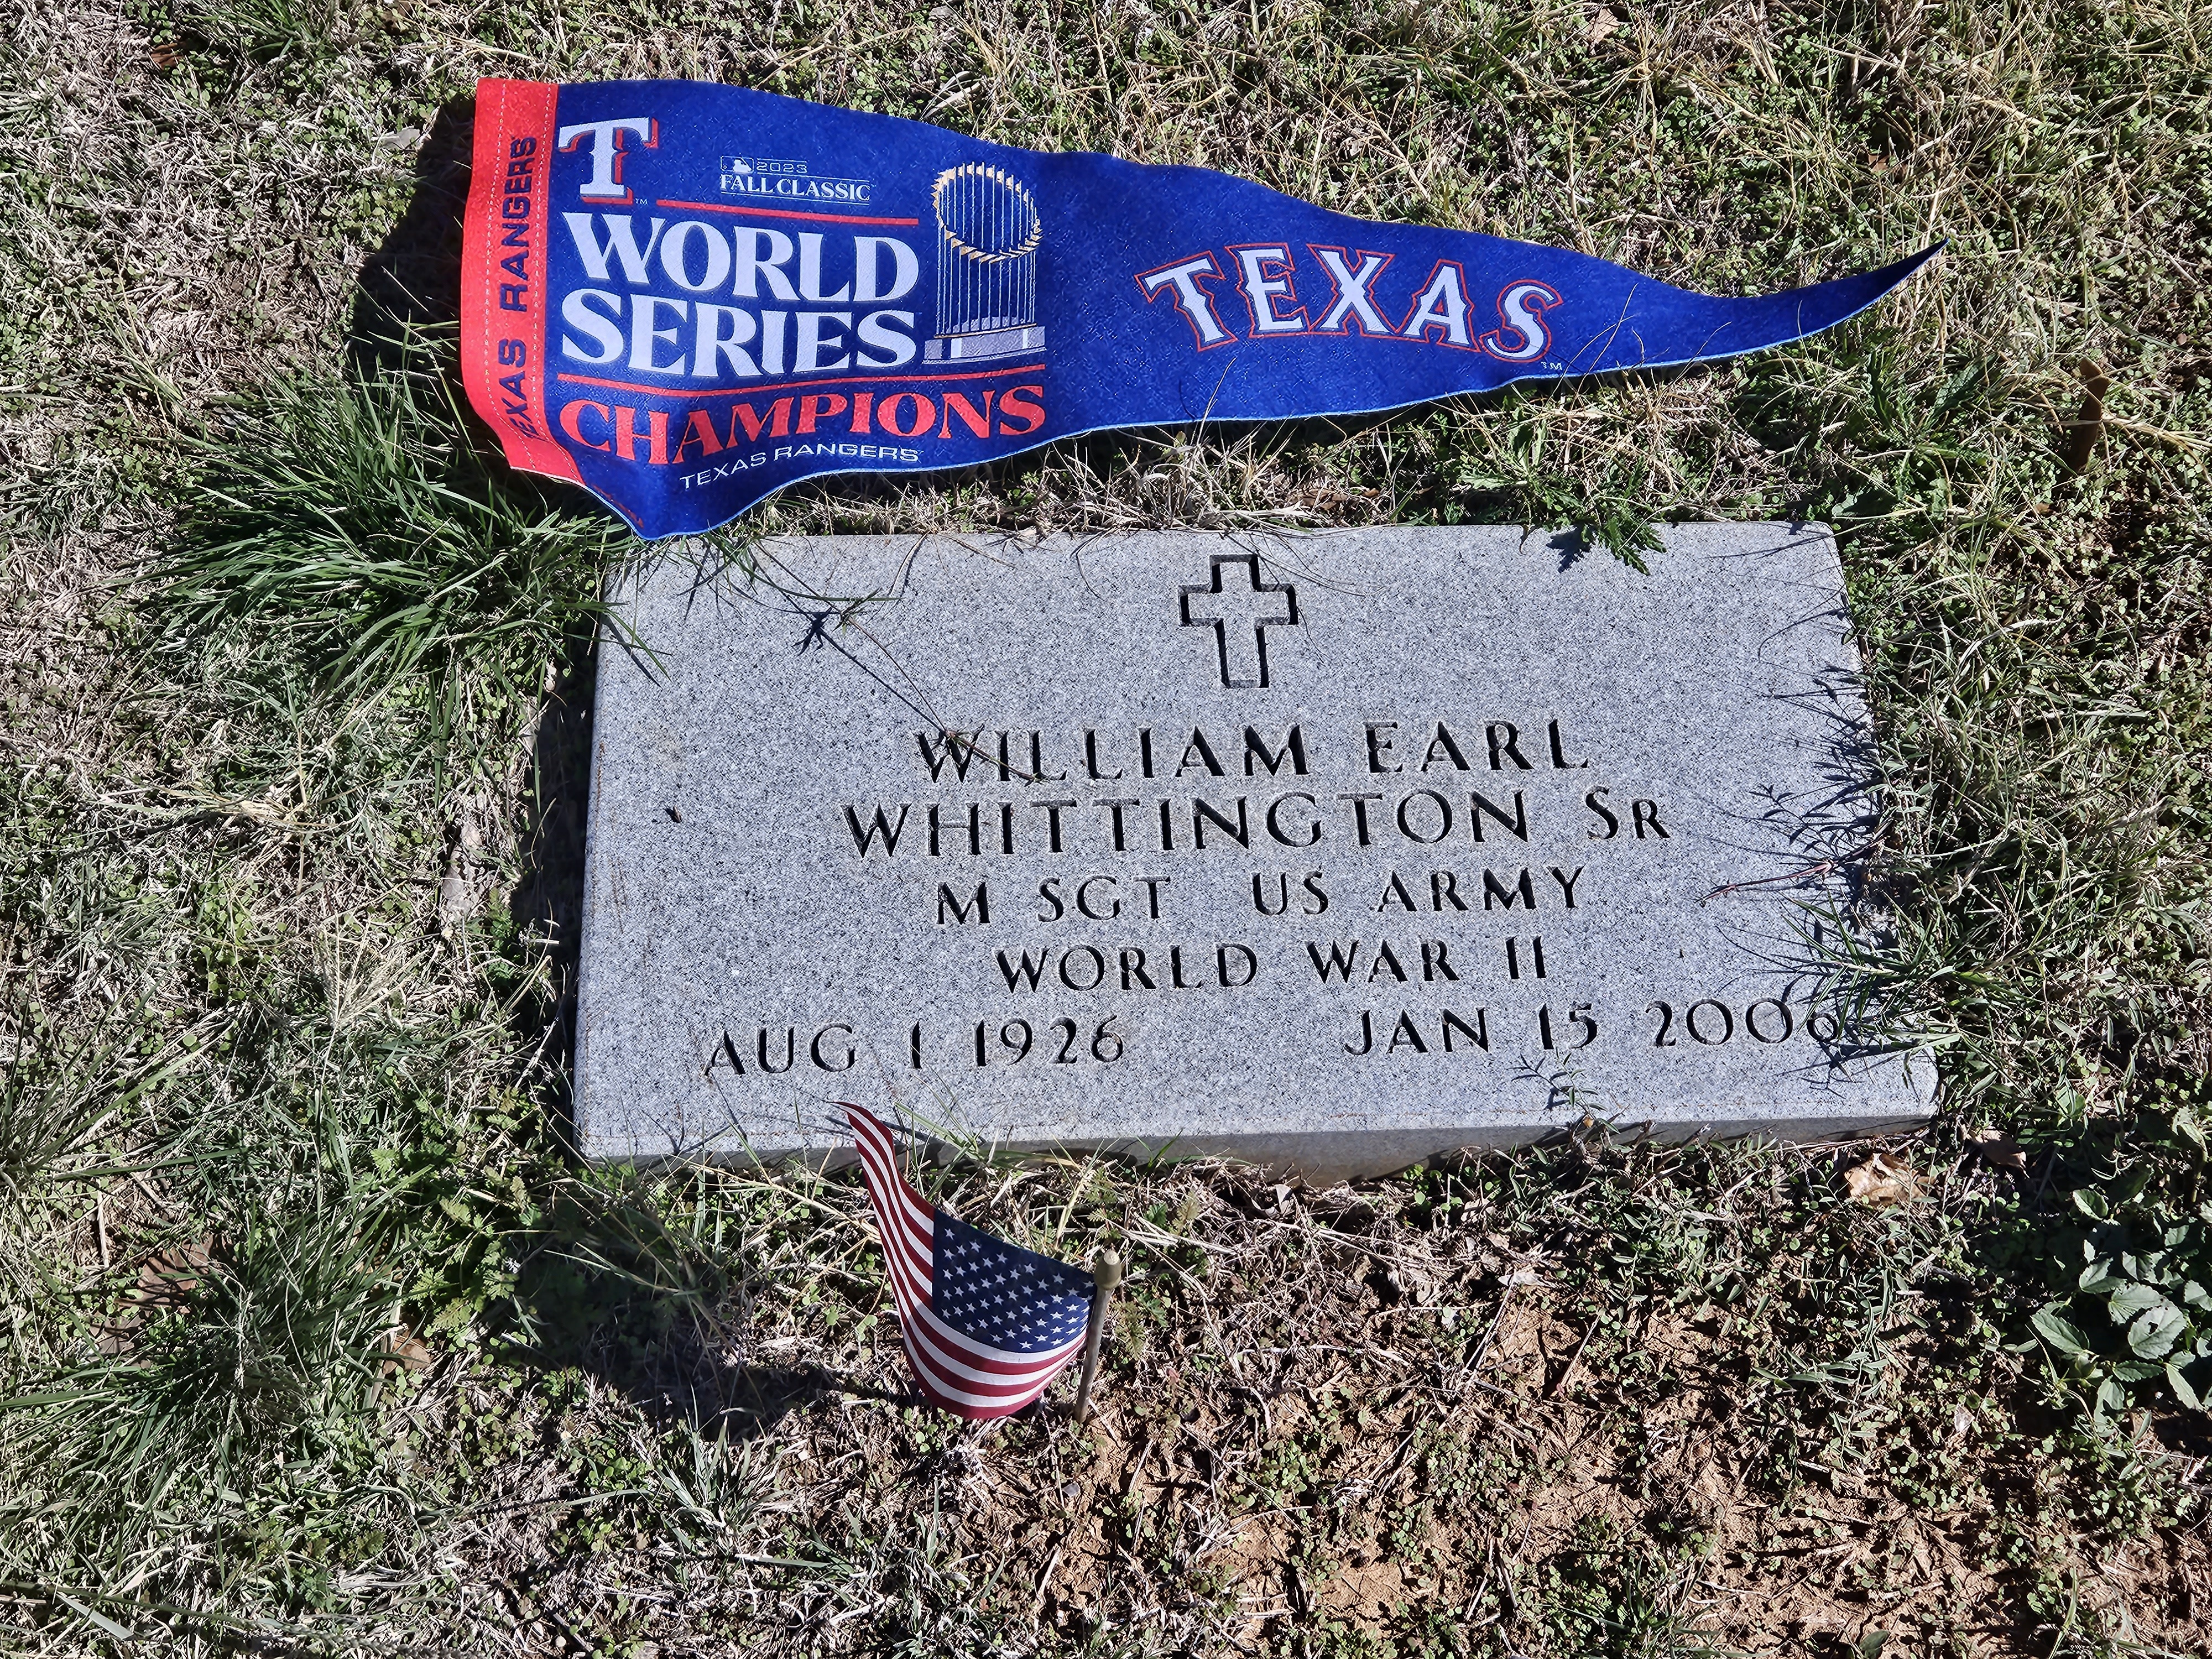 Image of headstone of William Earl Whittington, Sr. with a Texas Rangers World Series pennant above it. 